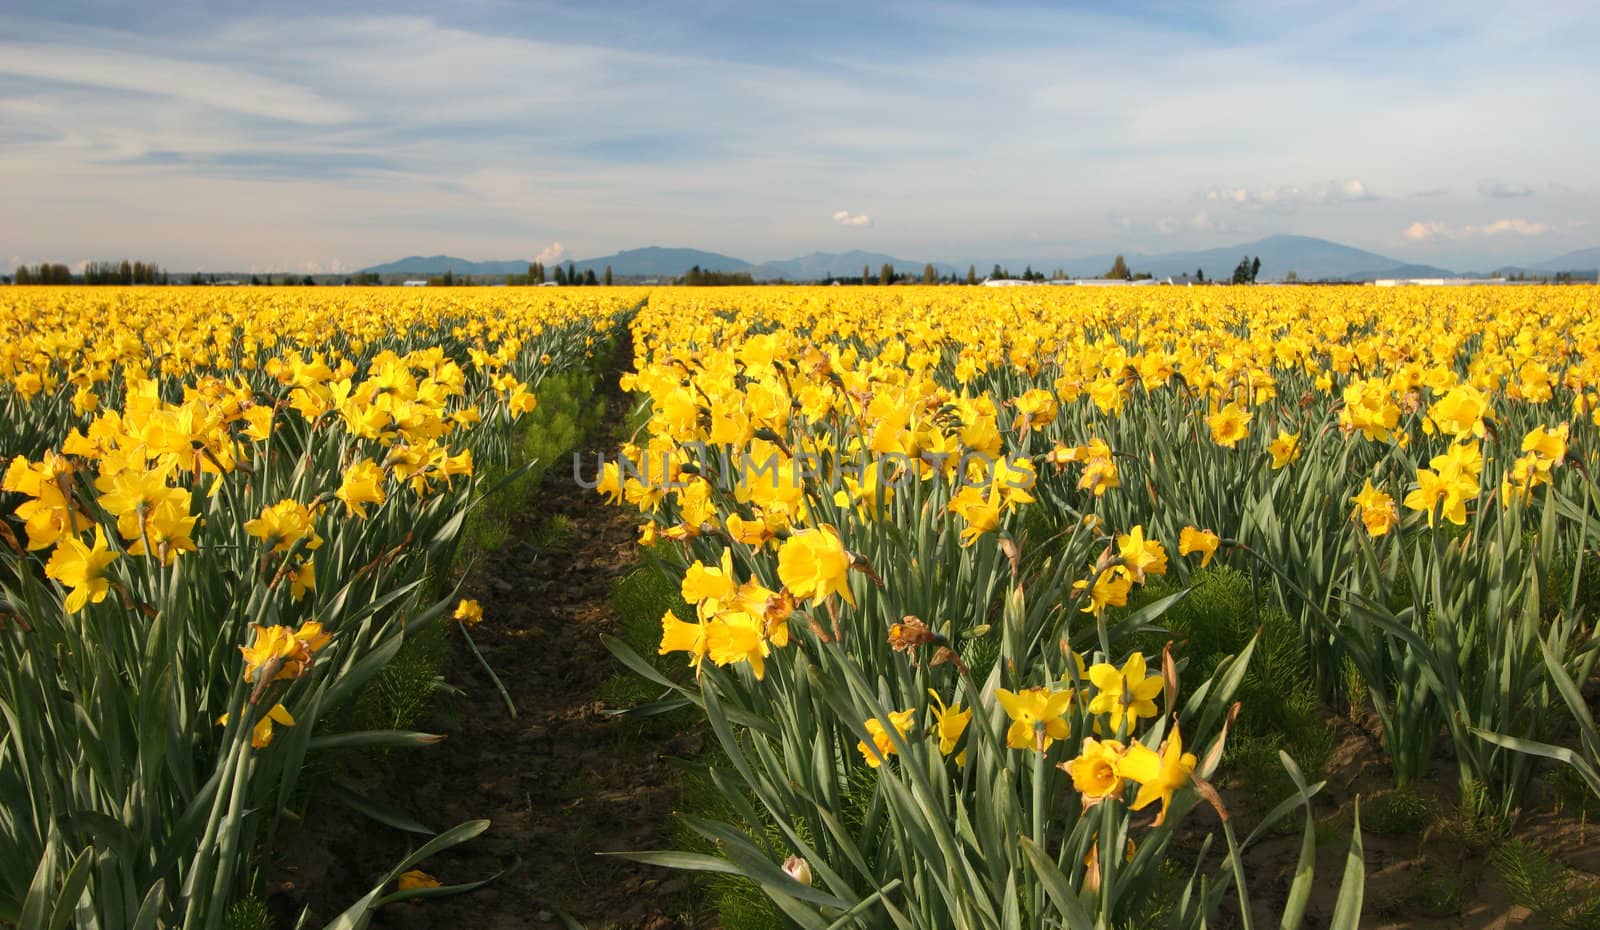 Field of Yellow Daffodils by LoonChild